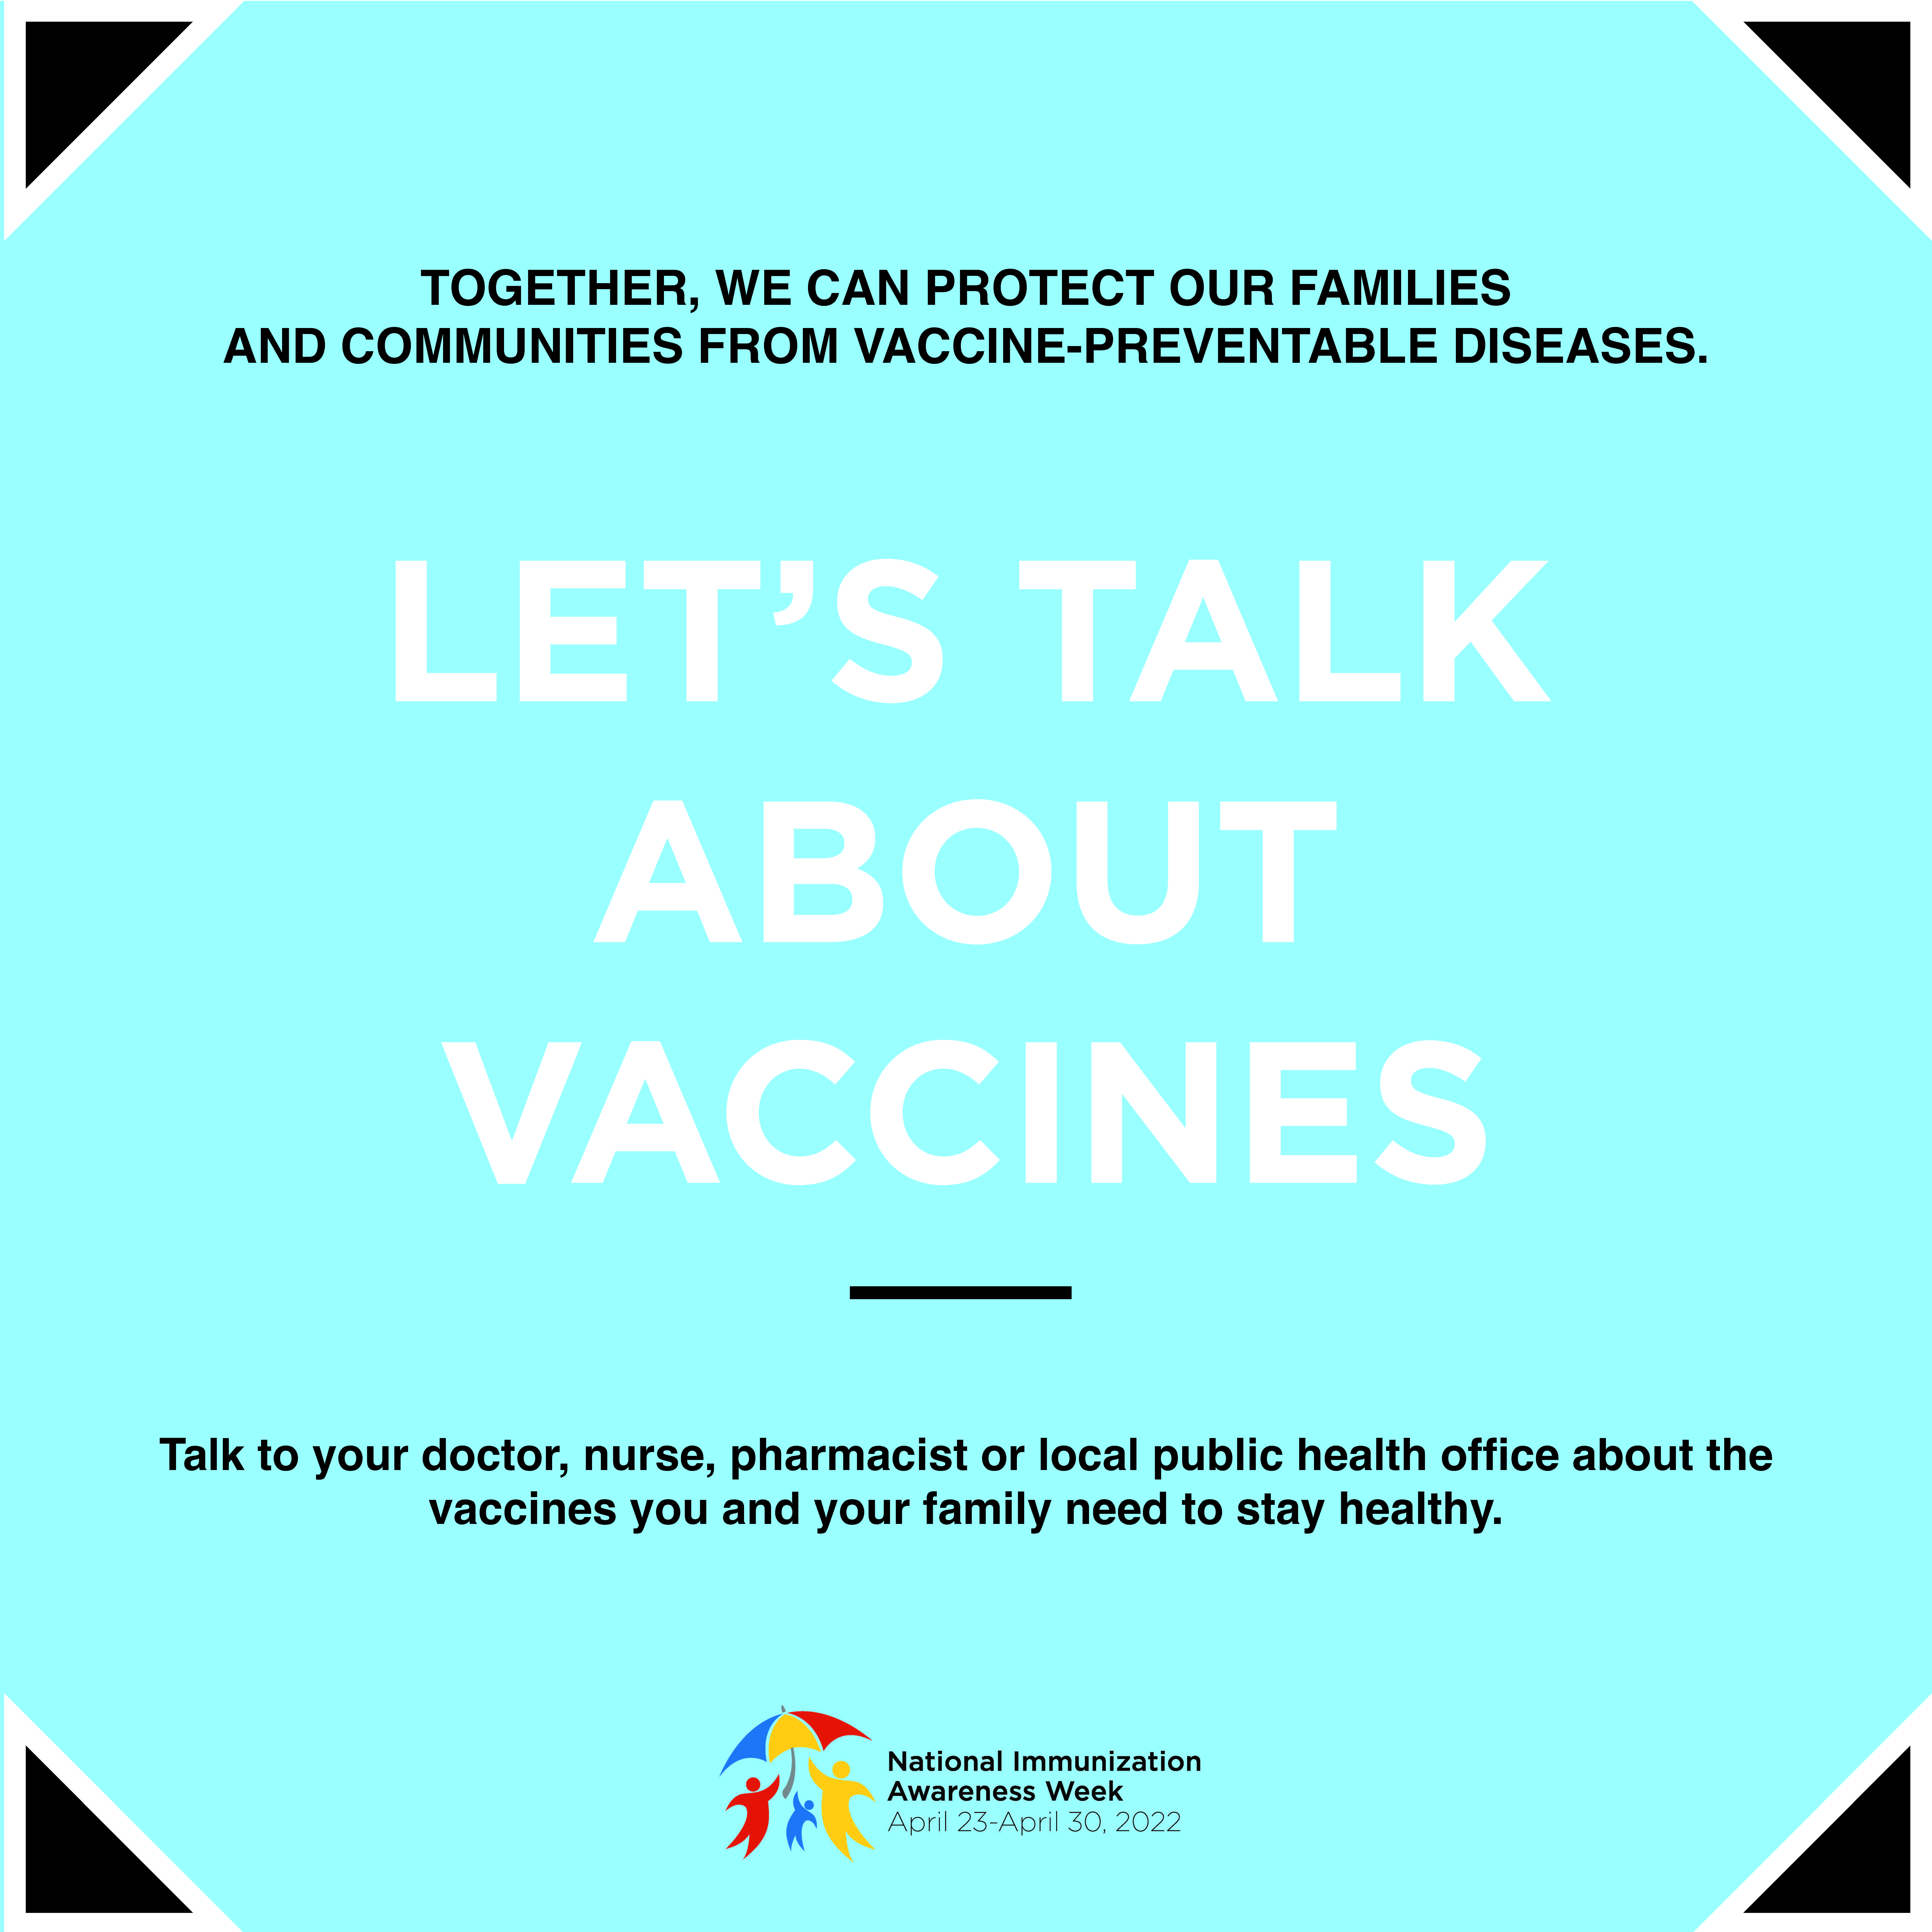 Let's talk about vaccines - customizable poster for social media